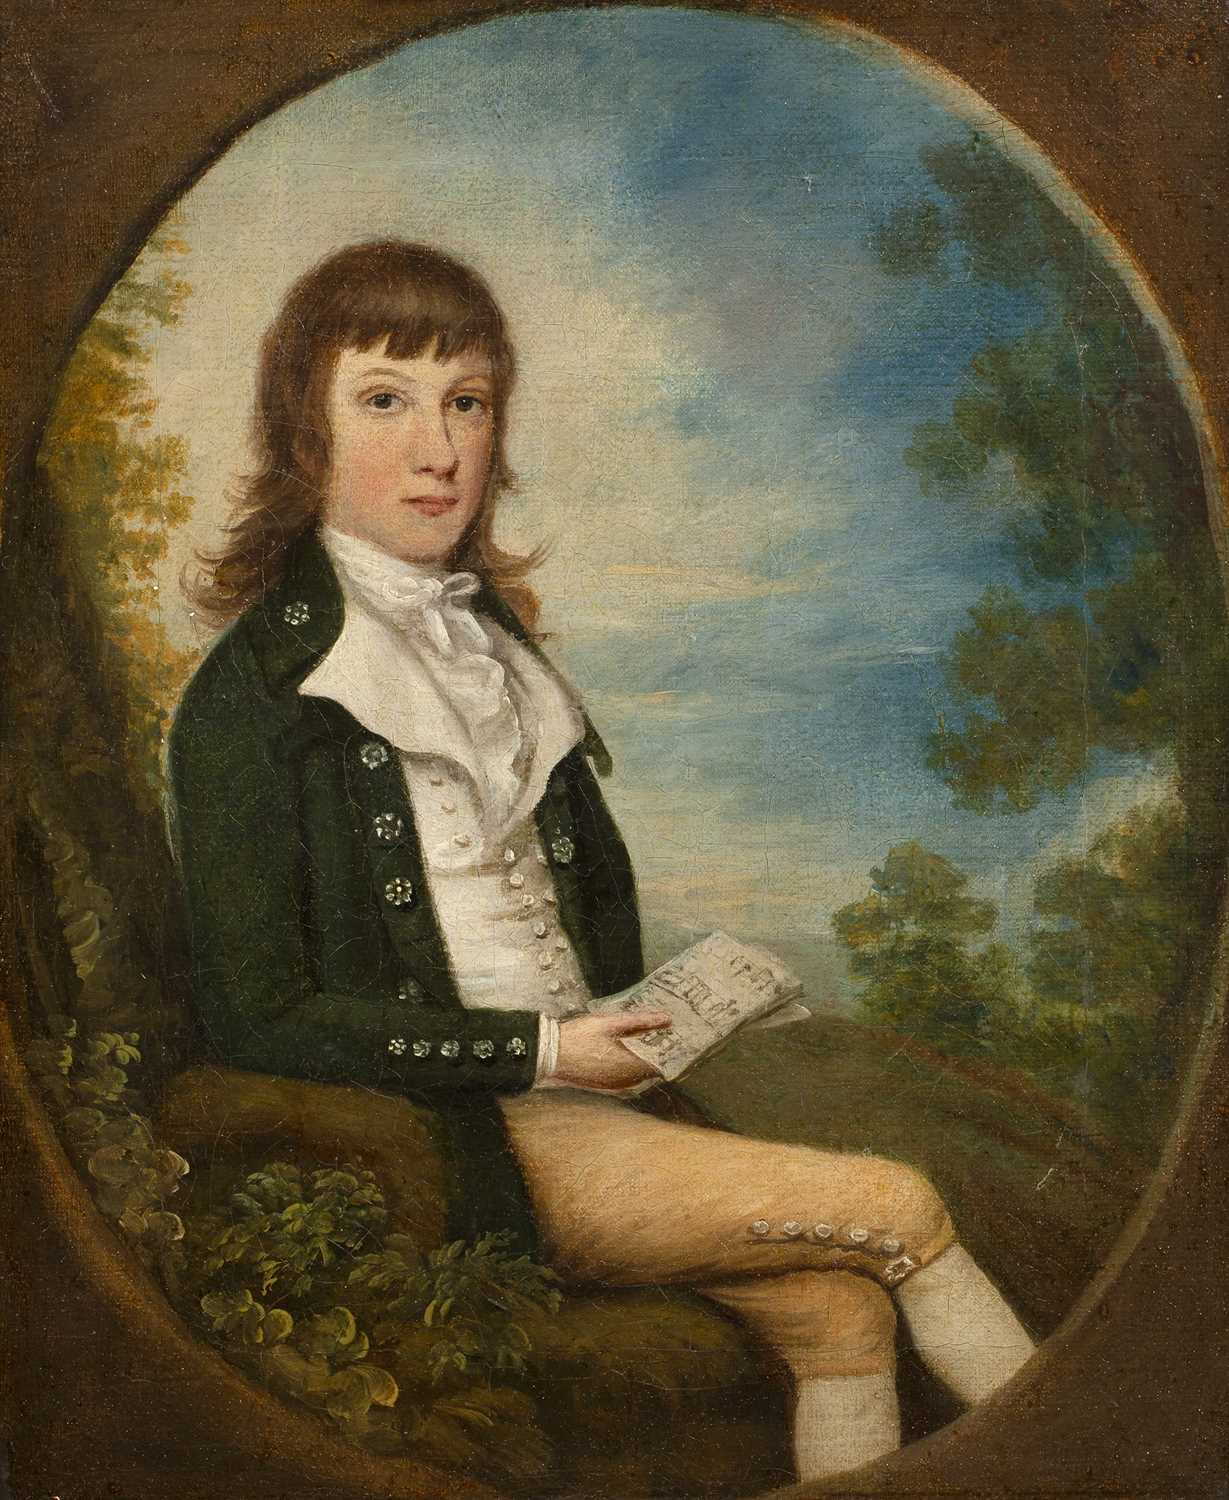 Attributed to Daniel Gardner (1750-1805) Portrait of a young boy seated with music manuscript in a